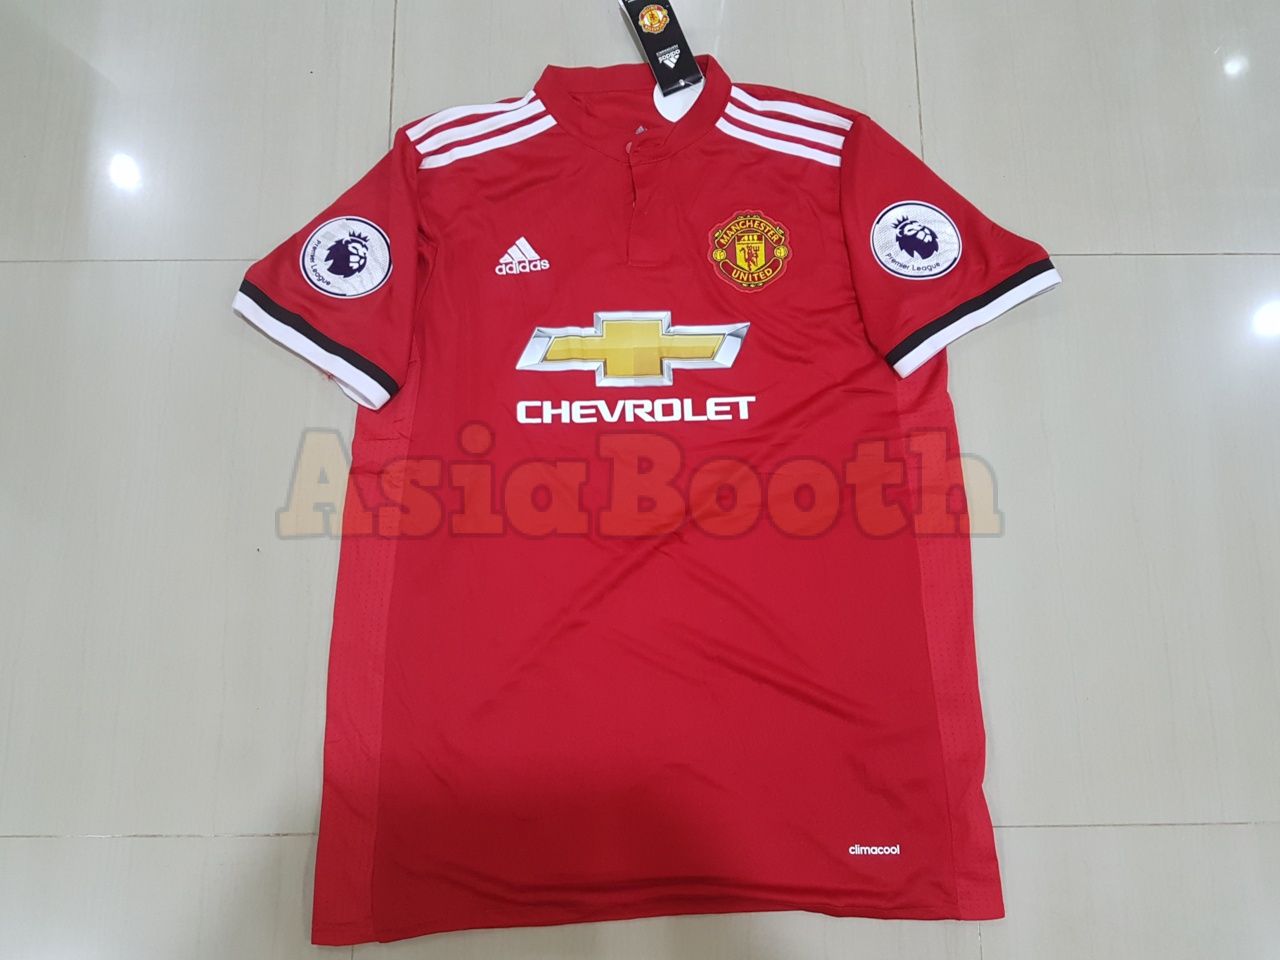 Home Jersey Shirt Climacool 